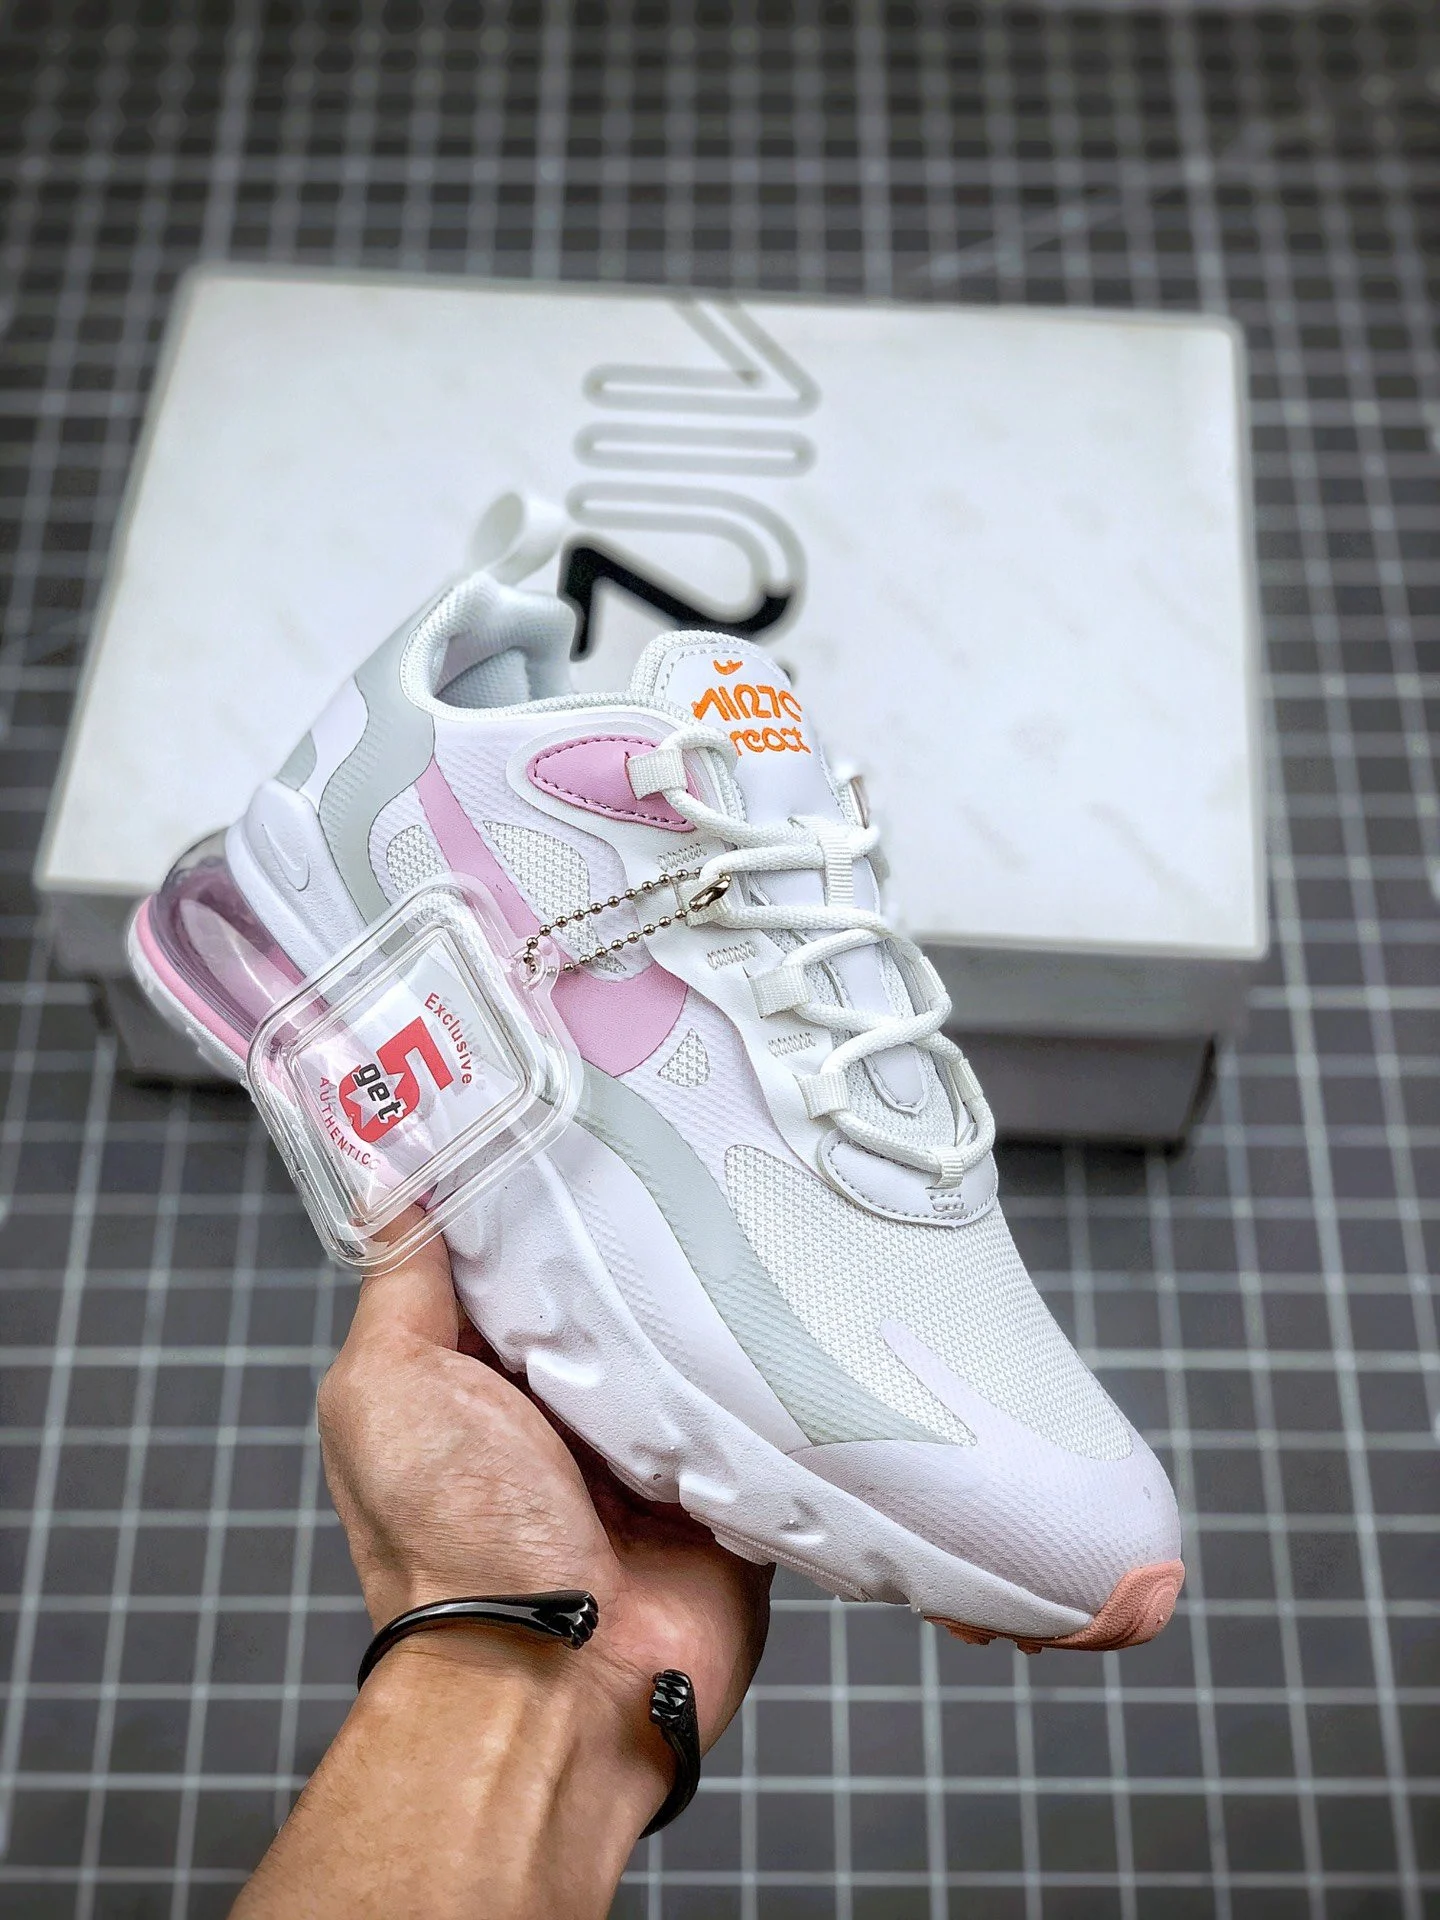 Nike Air Max 270 React White Vast Grey Pink CZ0372-101 For Sale